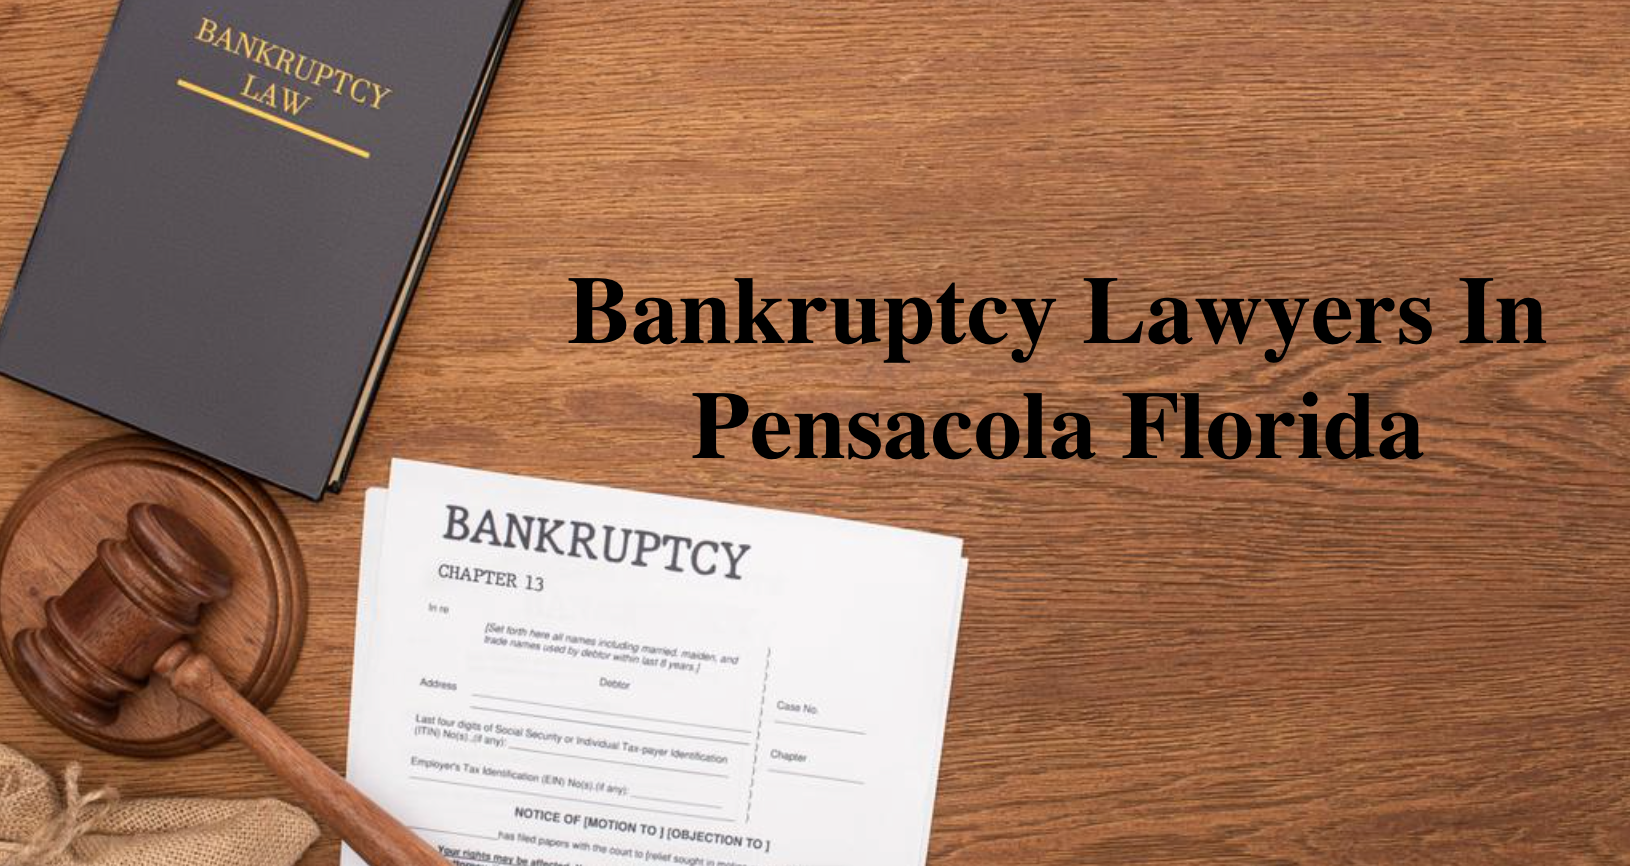 Bankruptcy Lawyers In Pensacola Florida